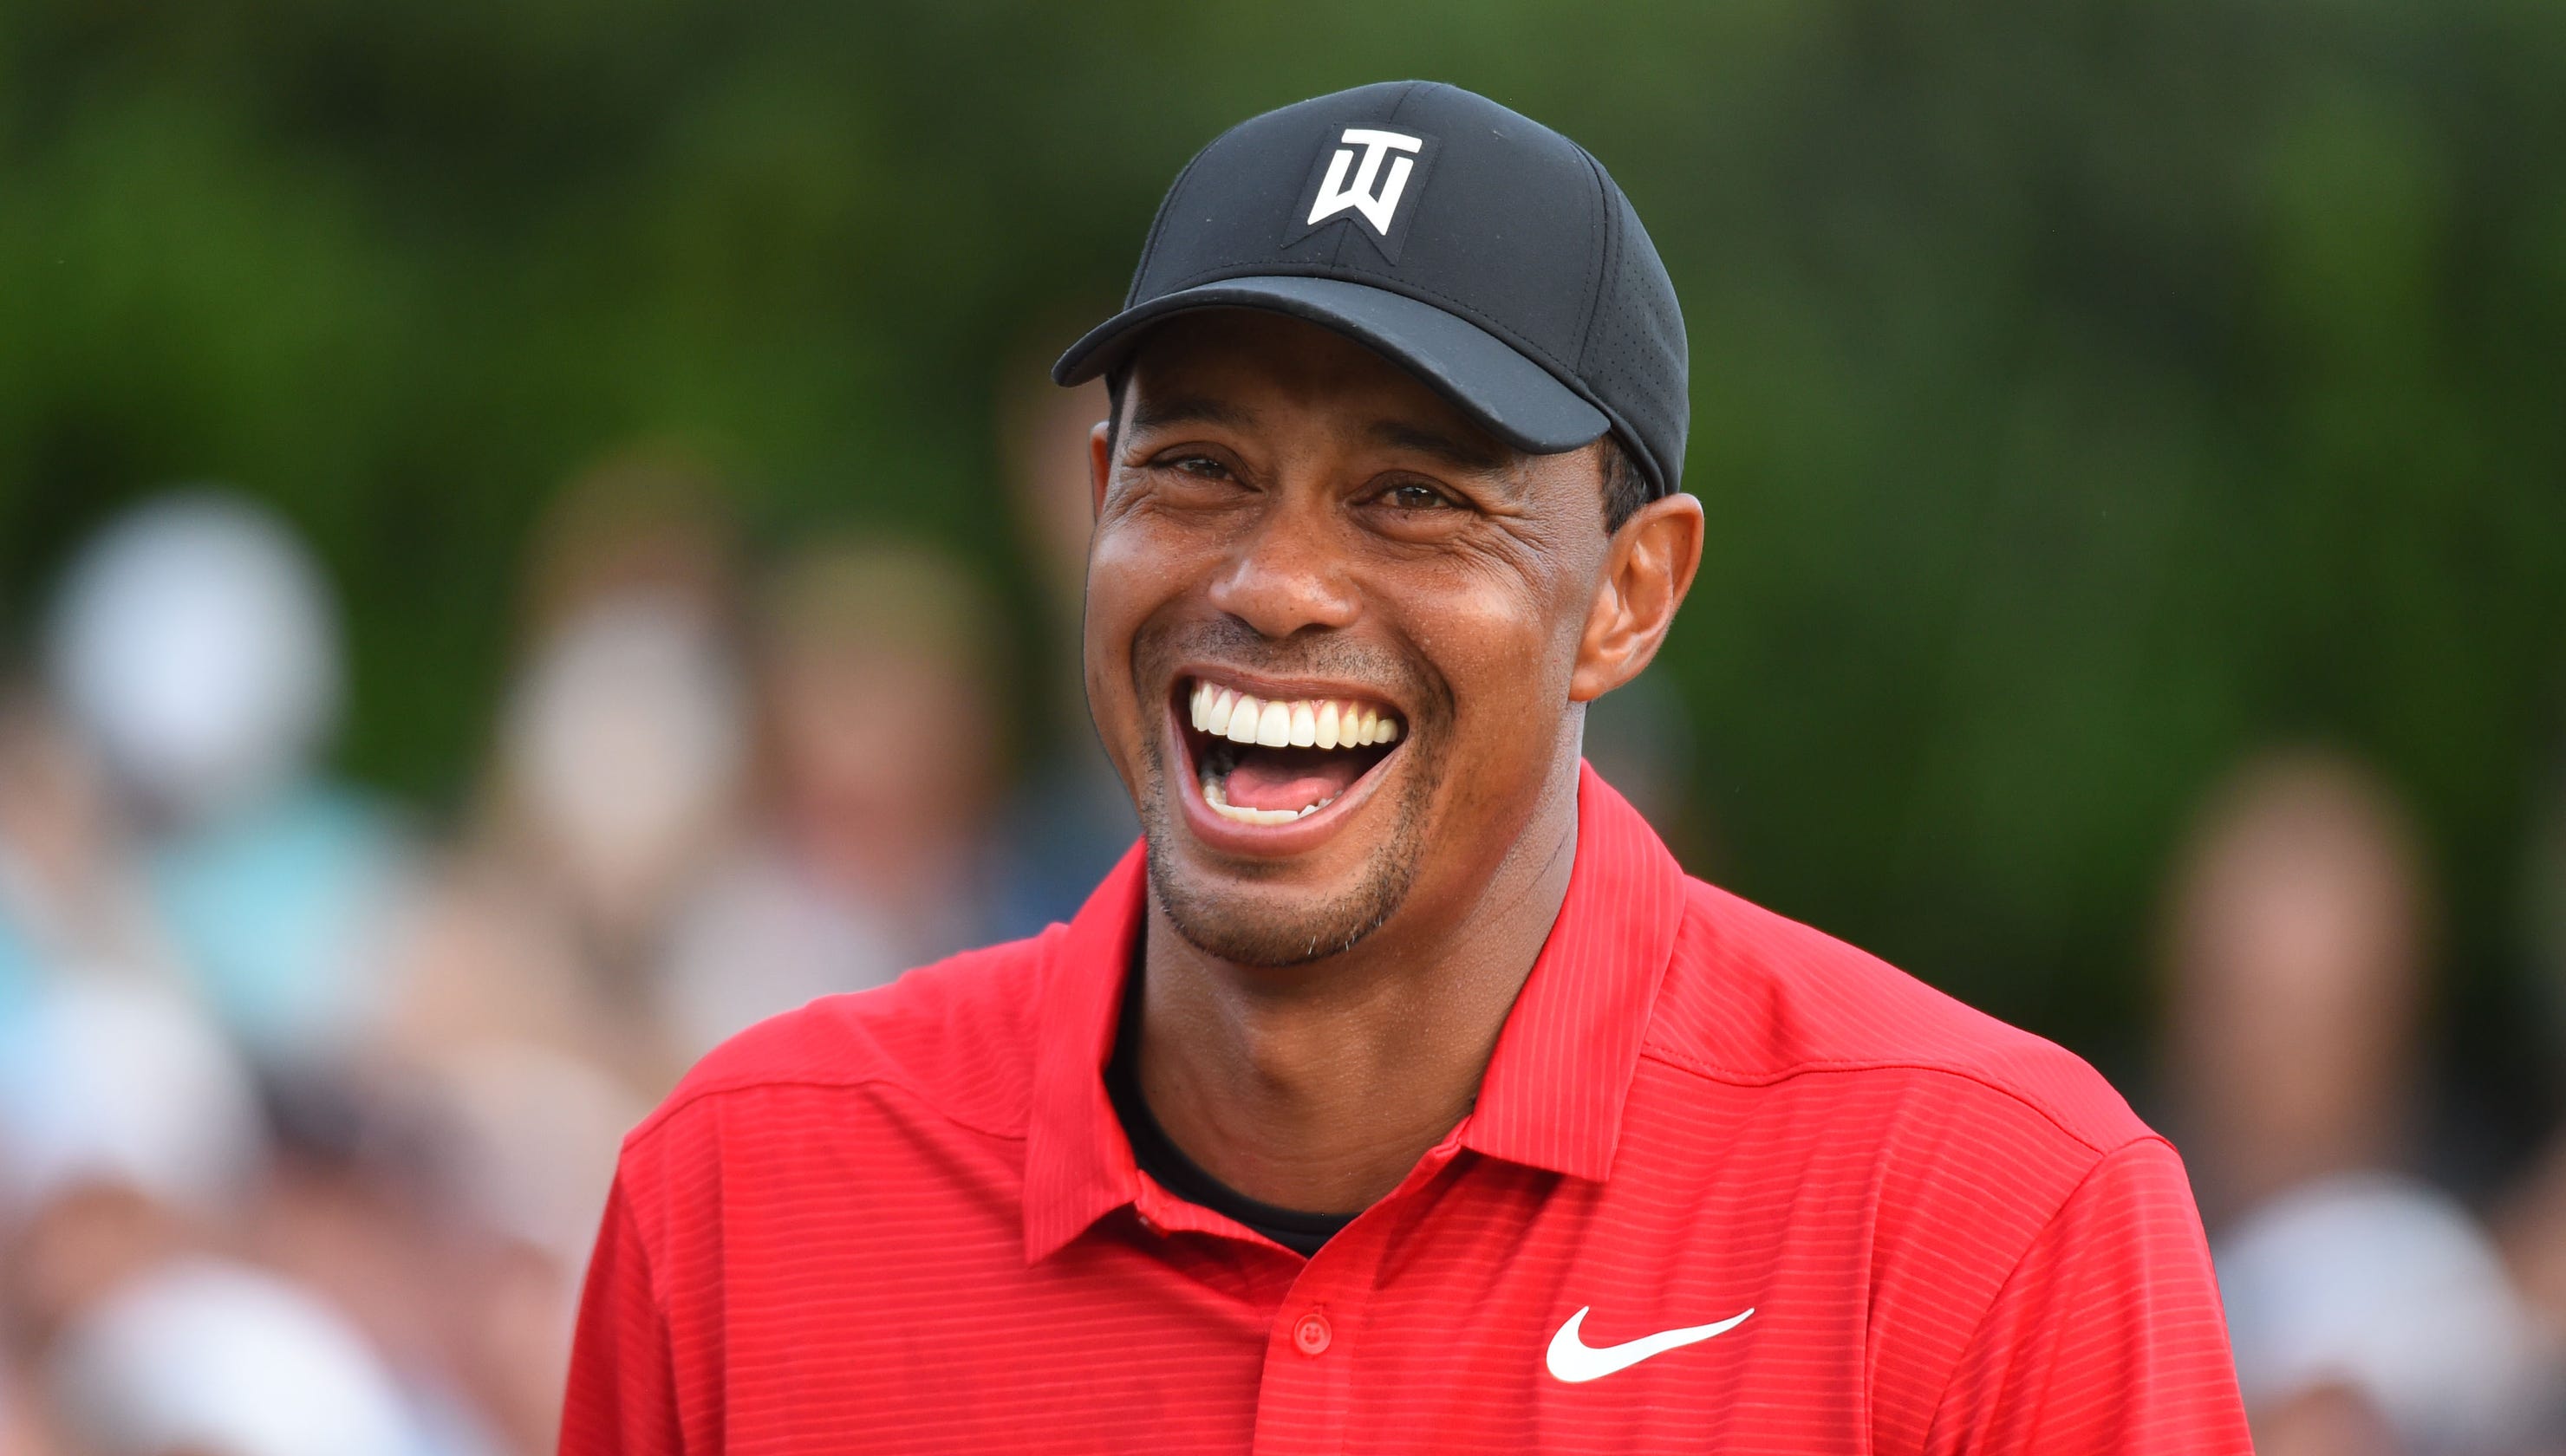 Tiger Woods: Winning his 15th major title might not be far off